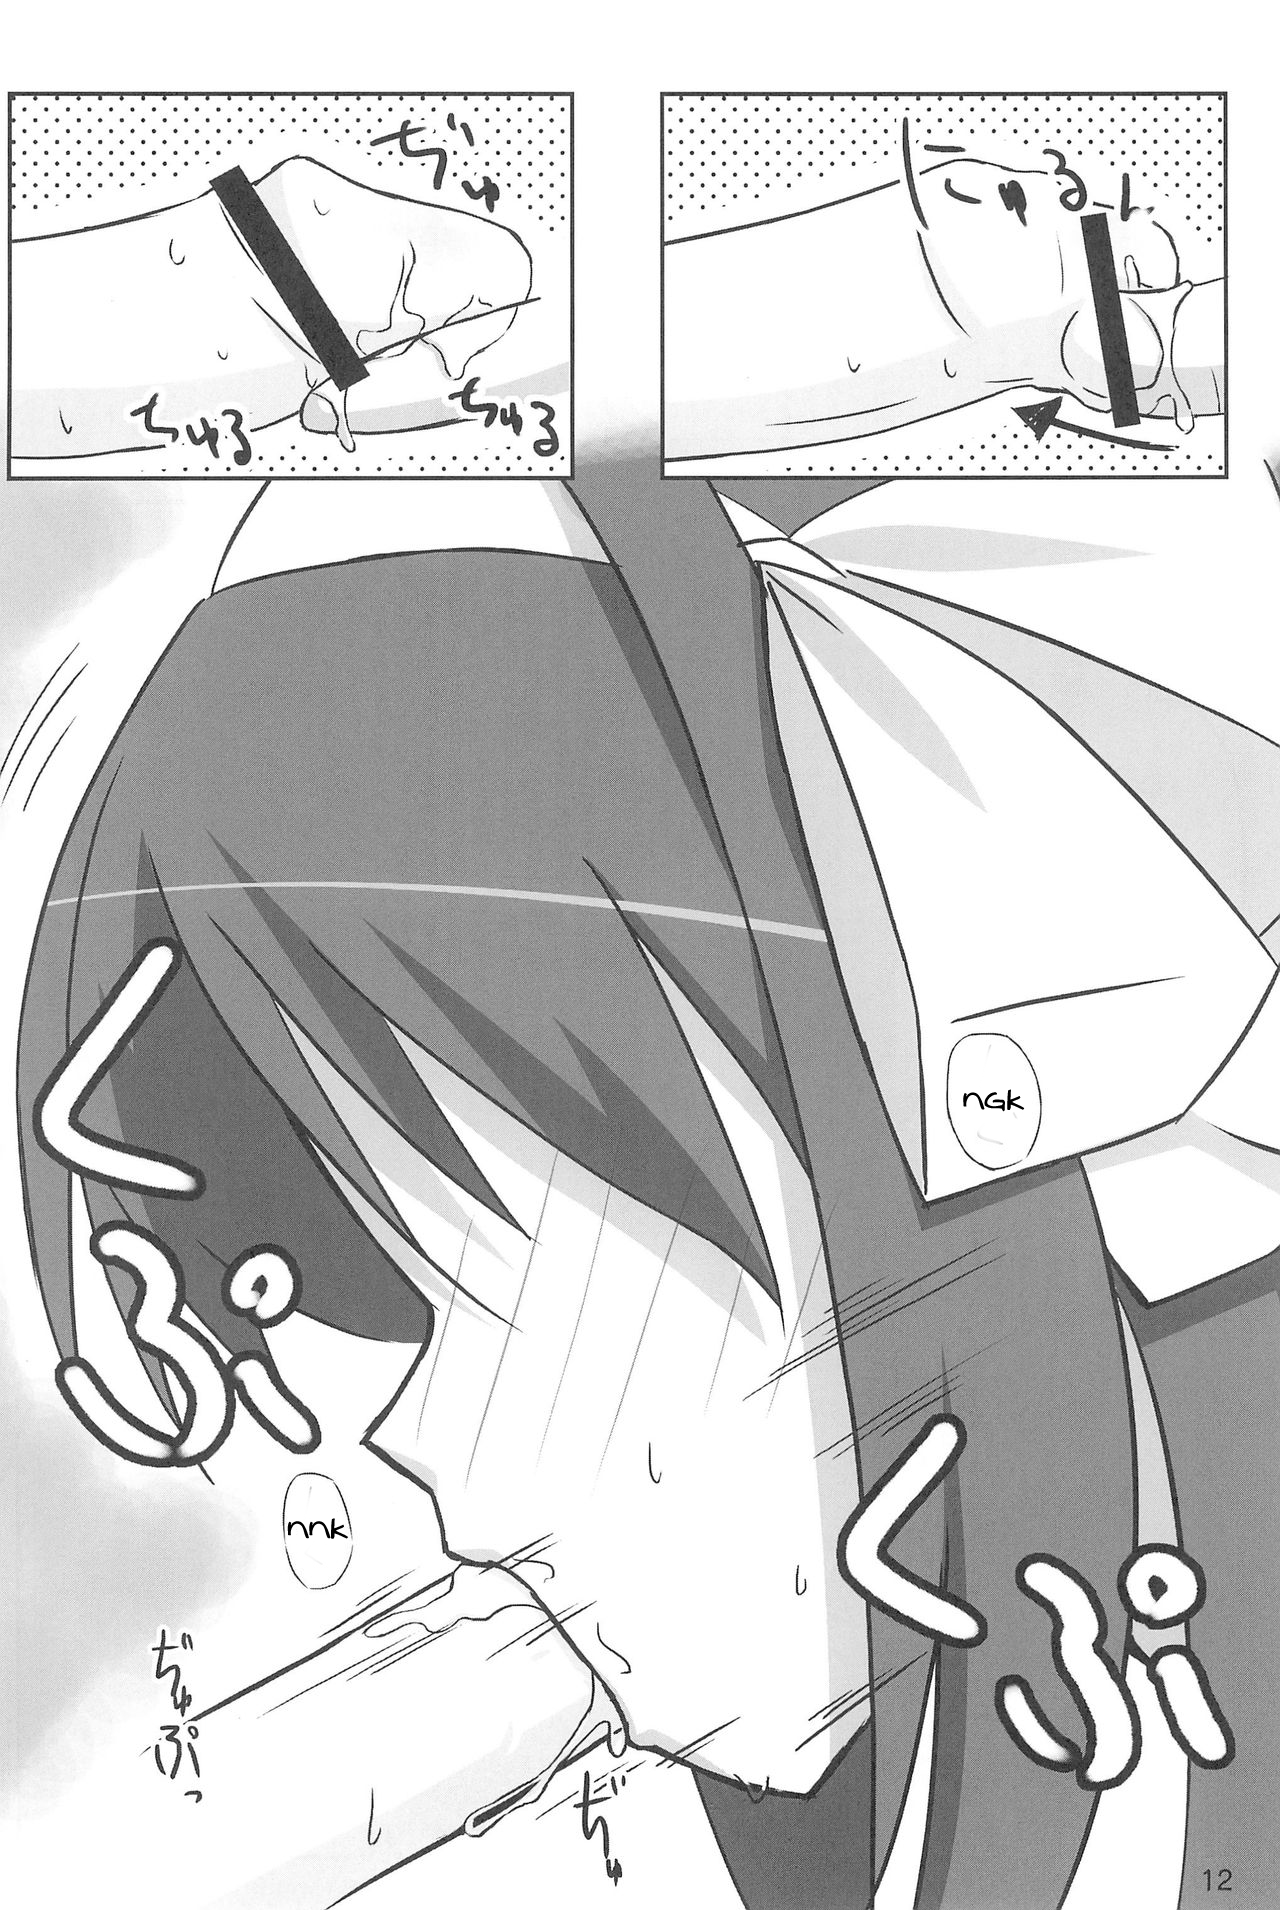 Tiny Angel Collection 3 hentai manga picture 12